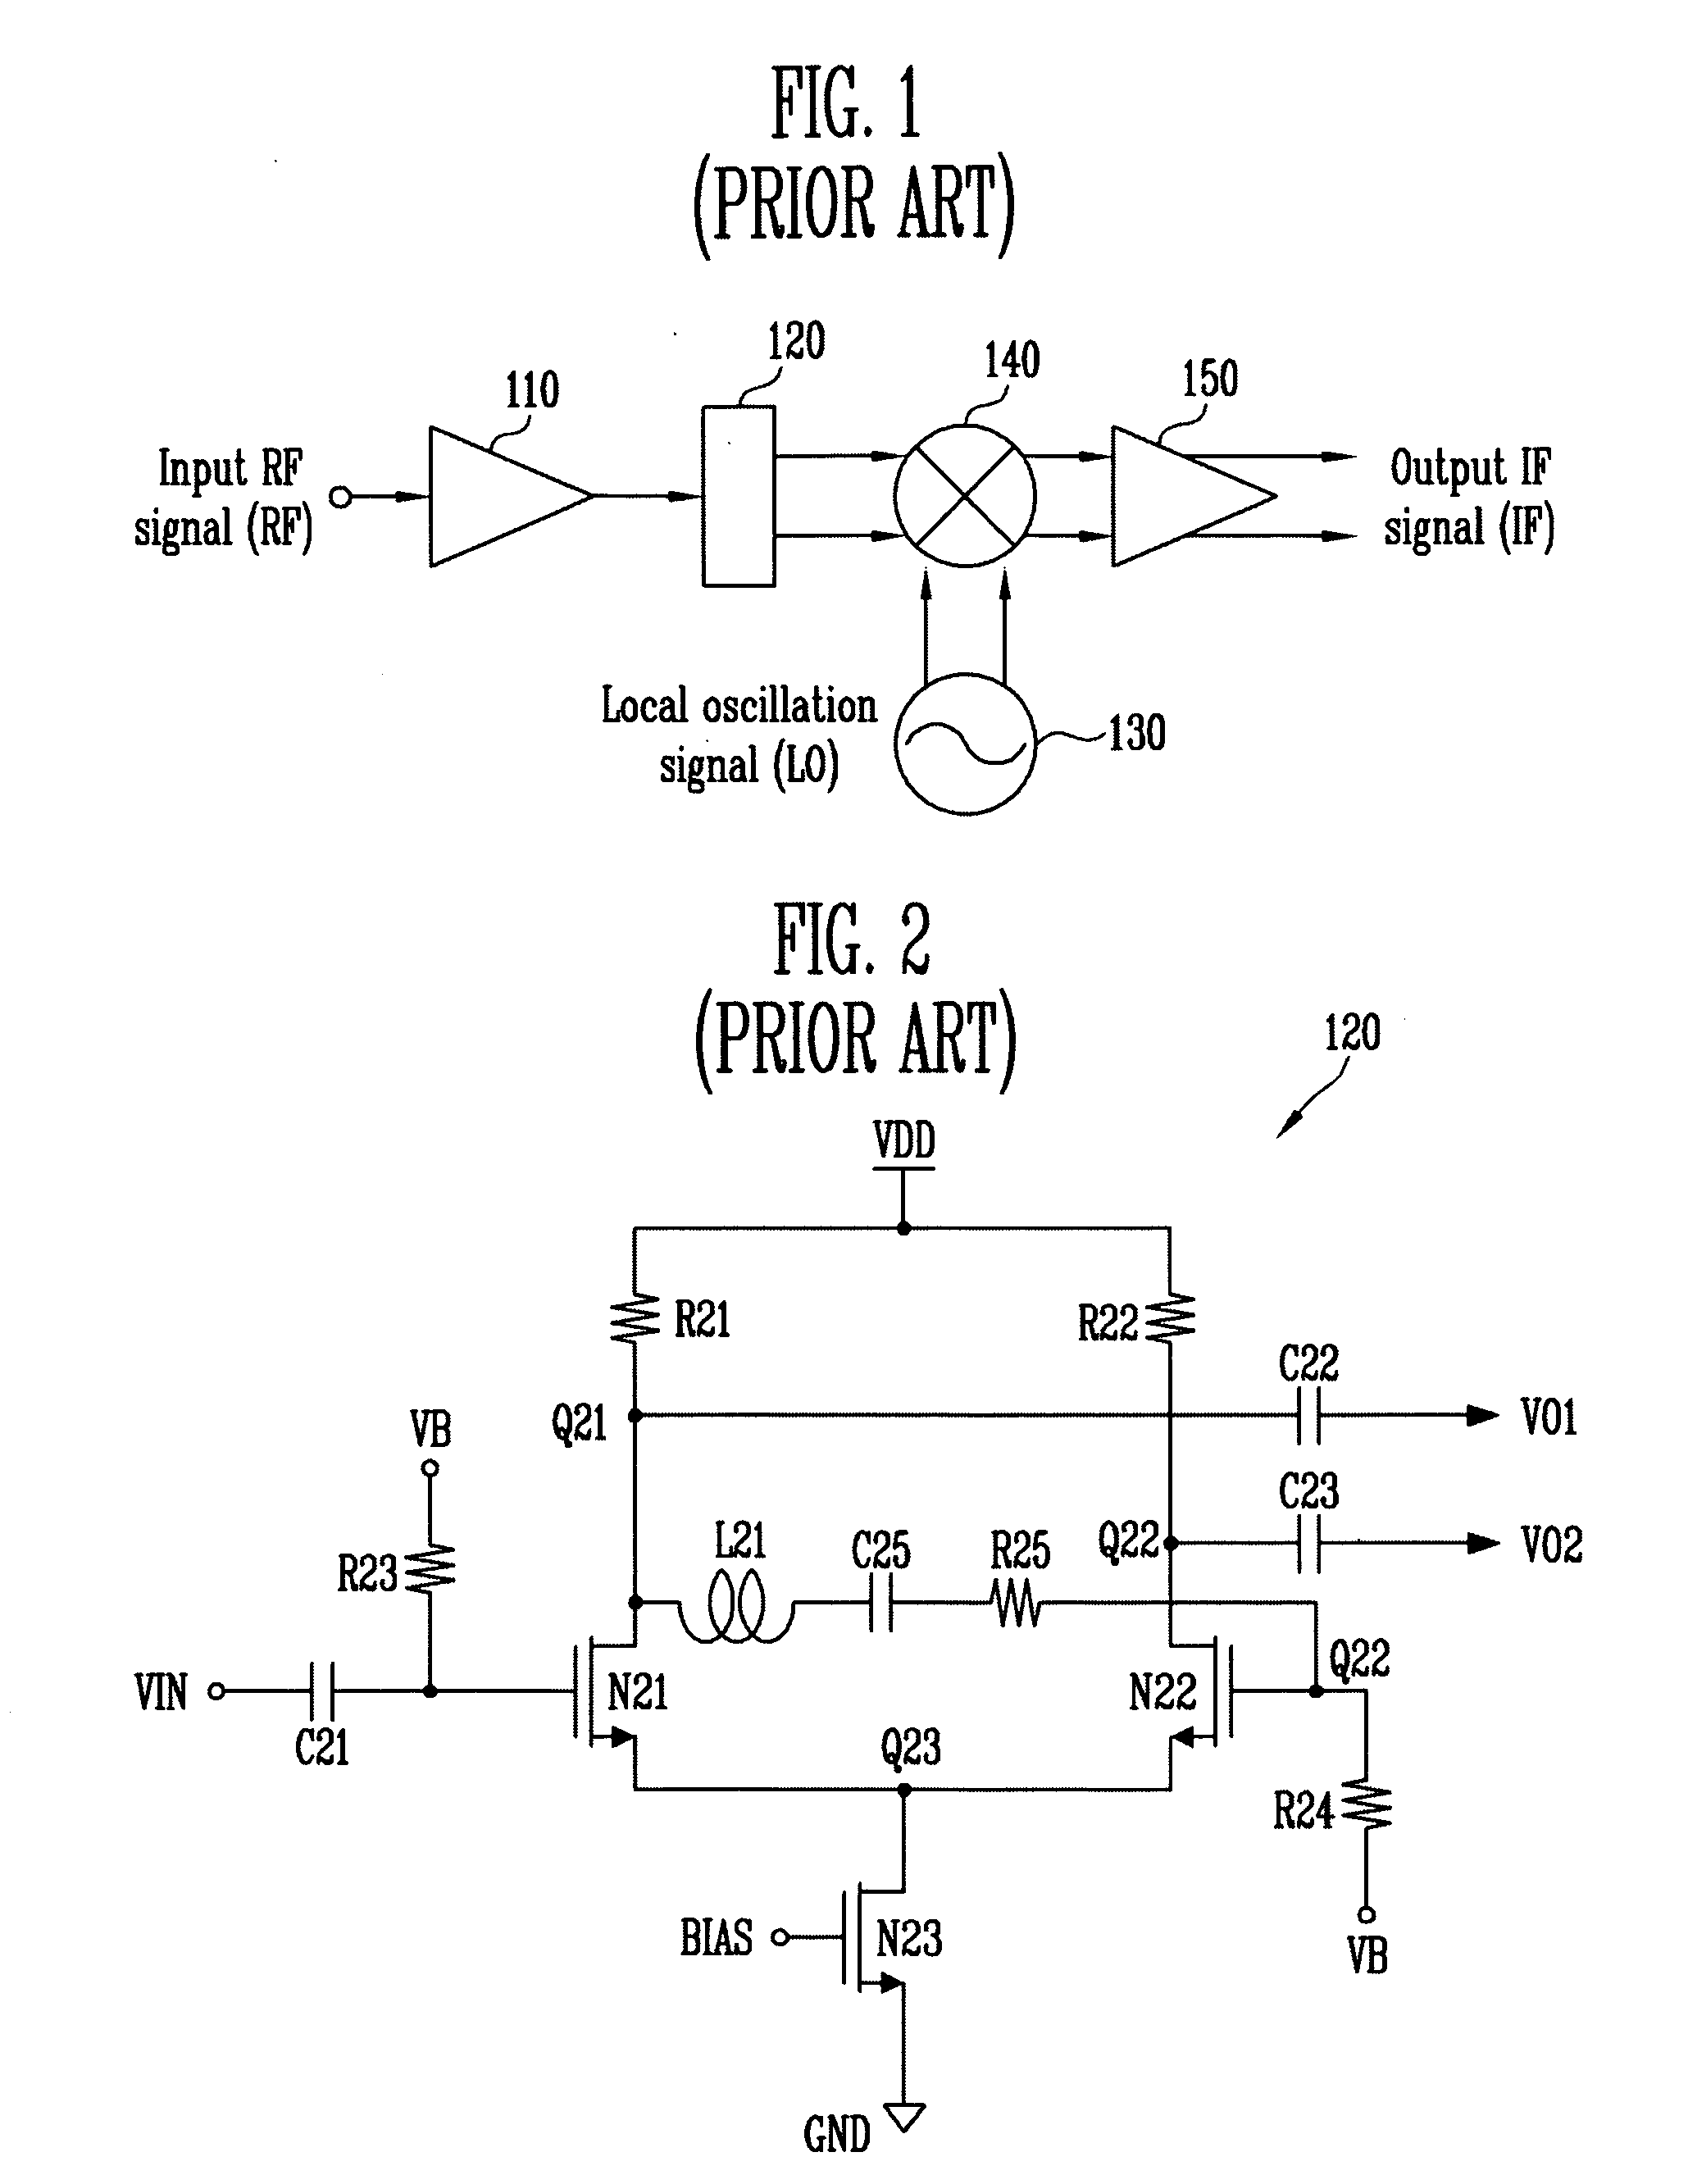 Wideband active balun circuit based on differential amplifier